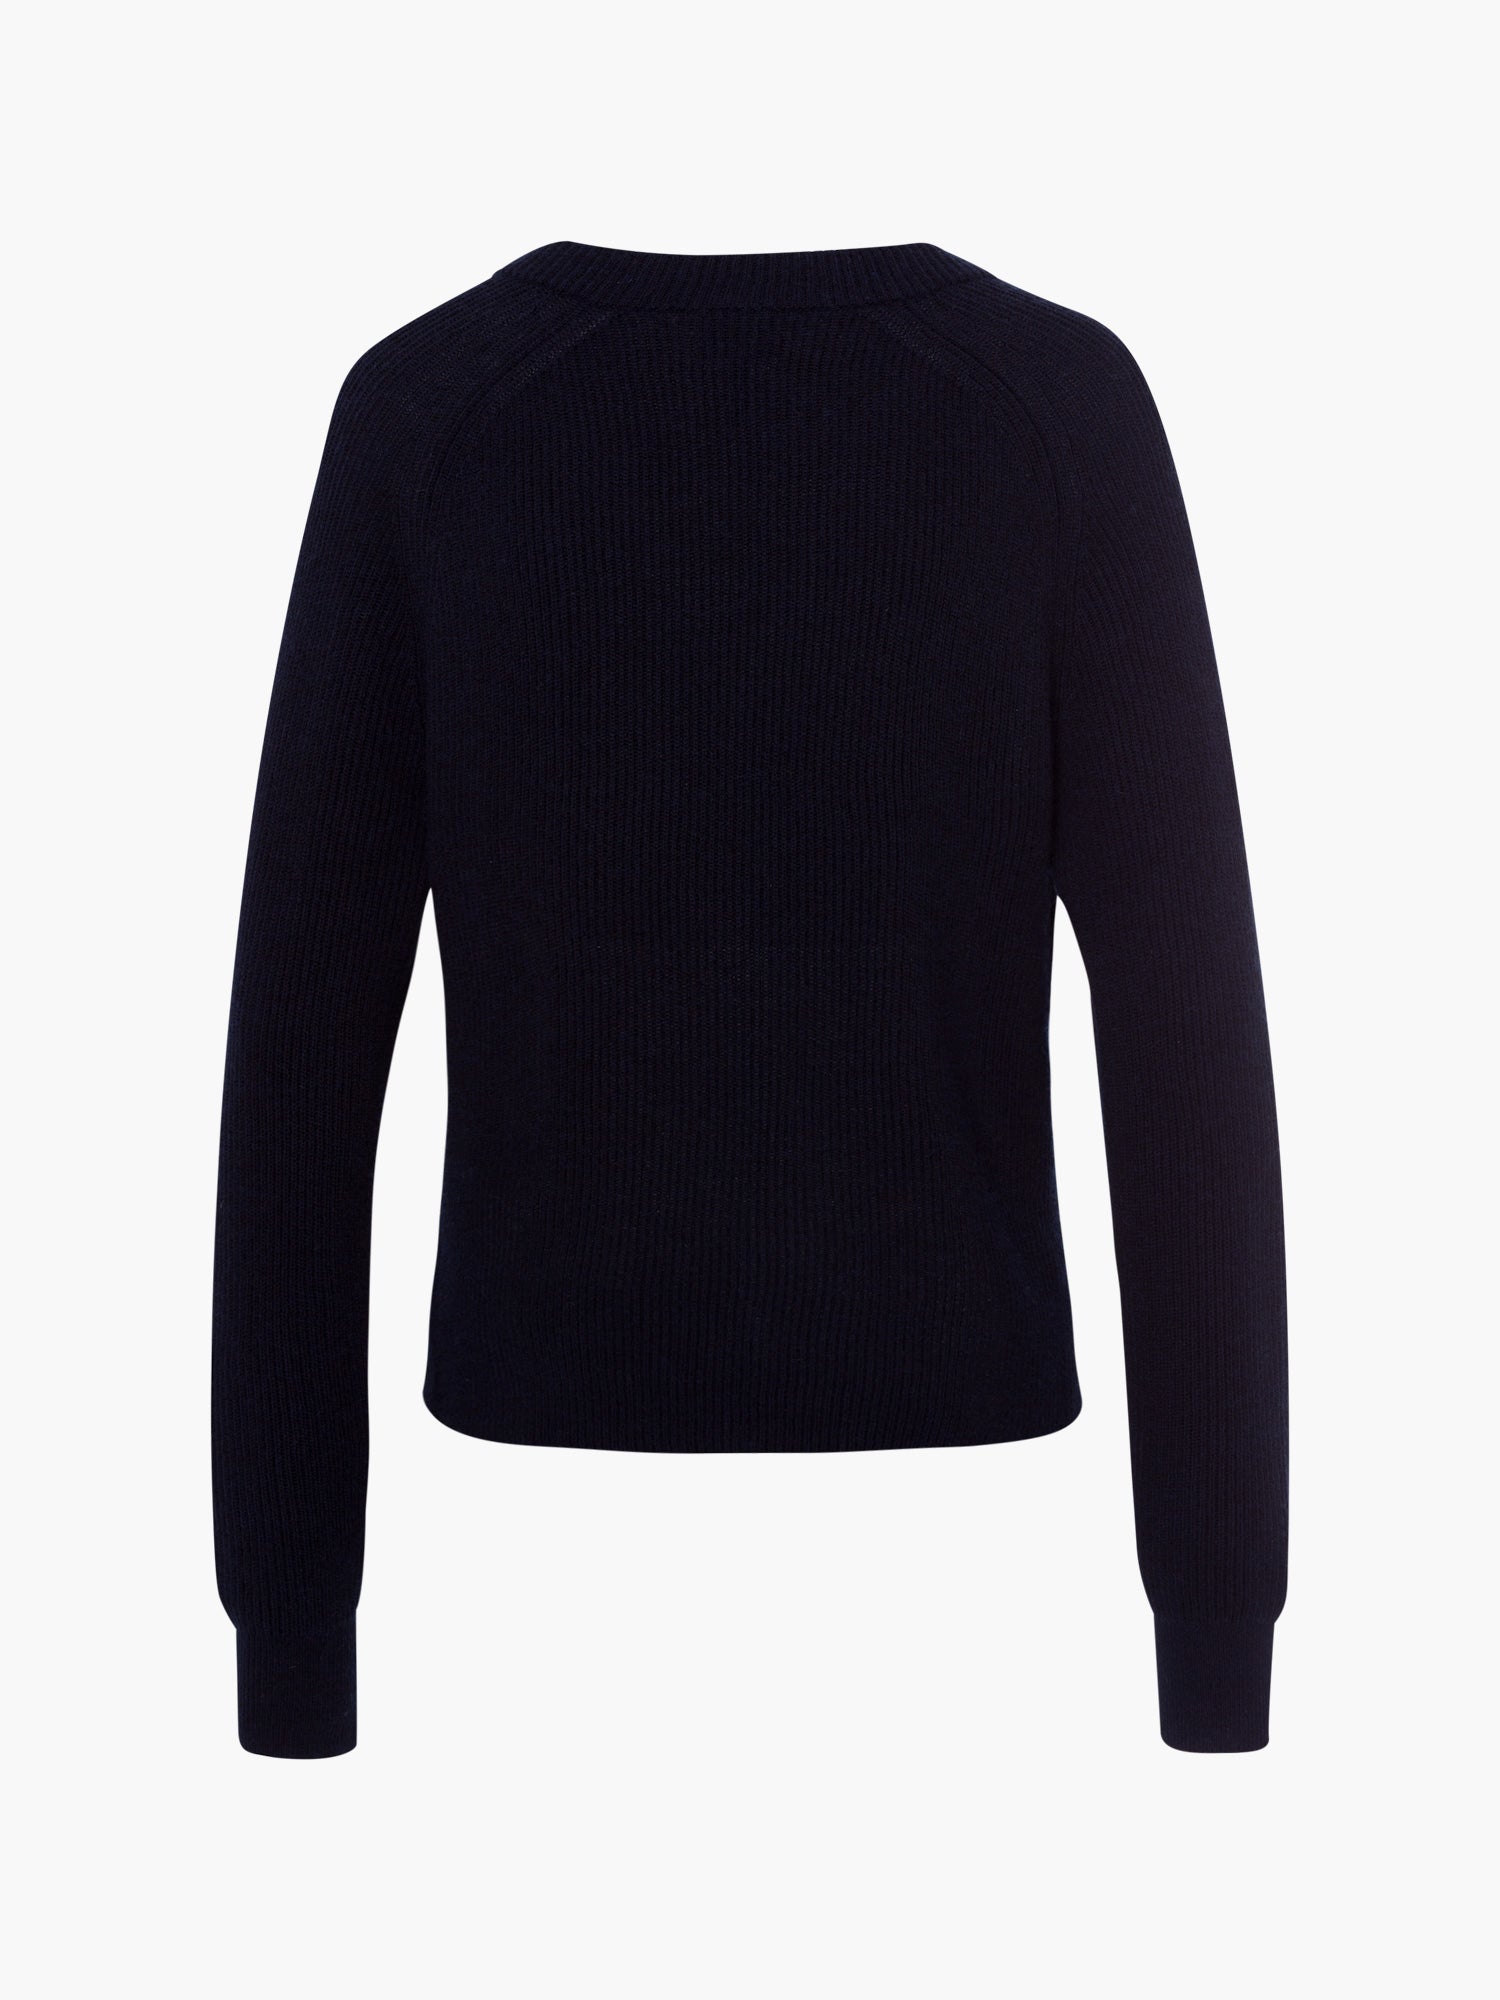 FTC-Cashmere-OUTLET-SALE-Pullover-VN-Strick-ARCHIVE-COLLECTION-2.jpg